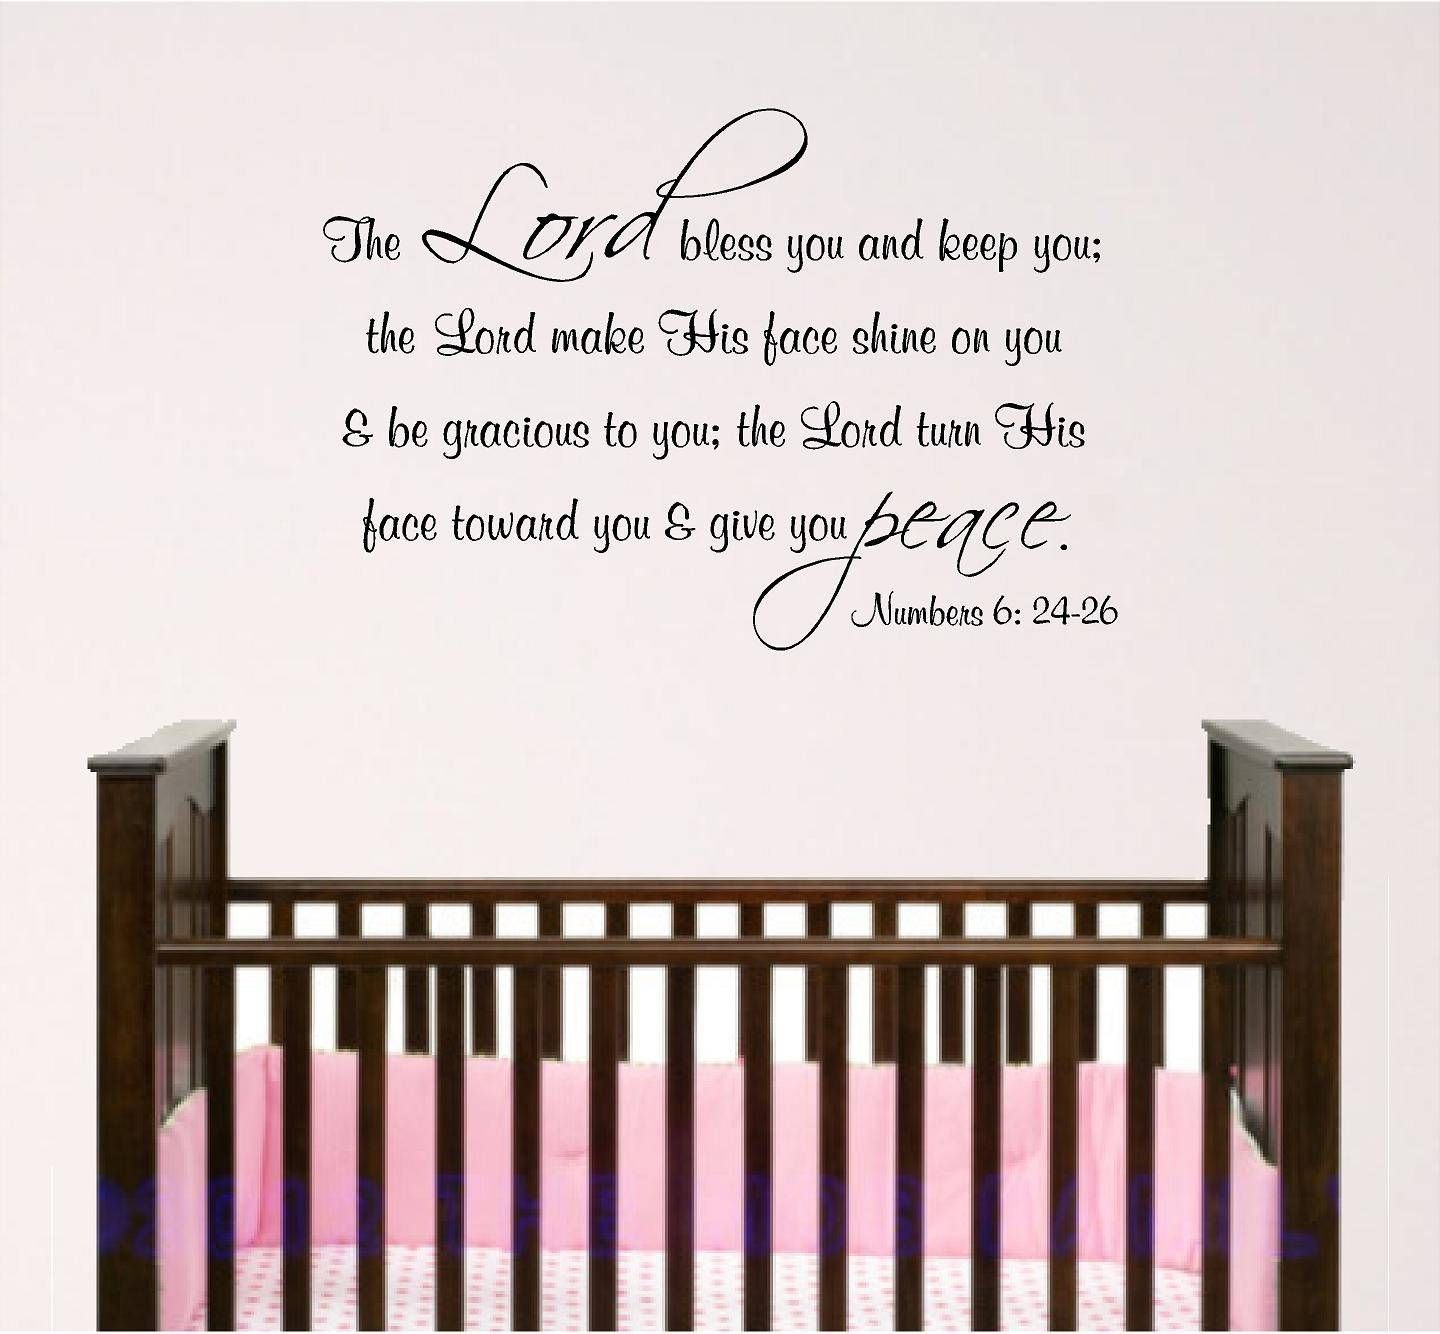 Nursery Bible Verse Wall Art Lord Bless You. Baby Room Decal Within 2018 Nursery Bible Verses Wall Decals (Gallery 1 of 25)